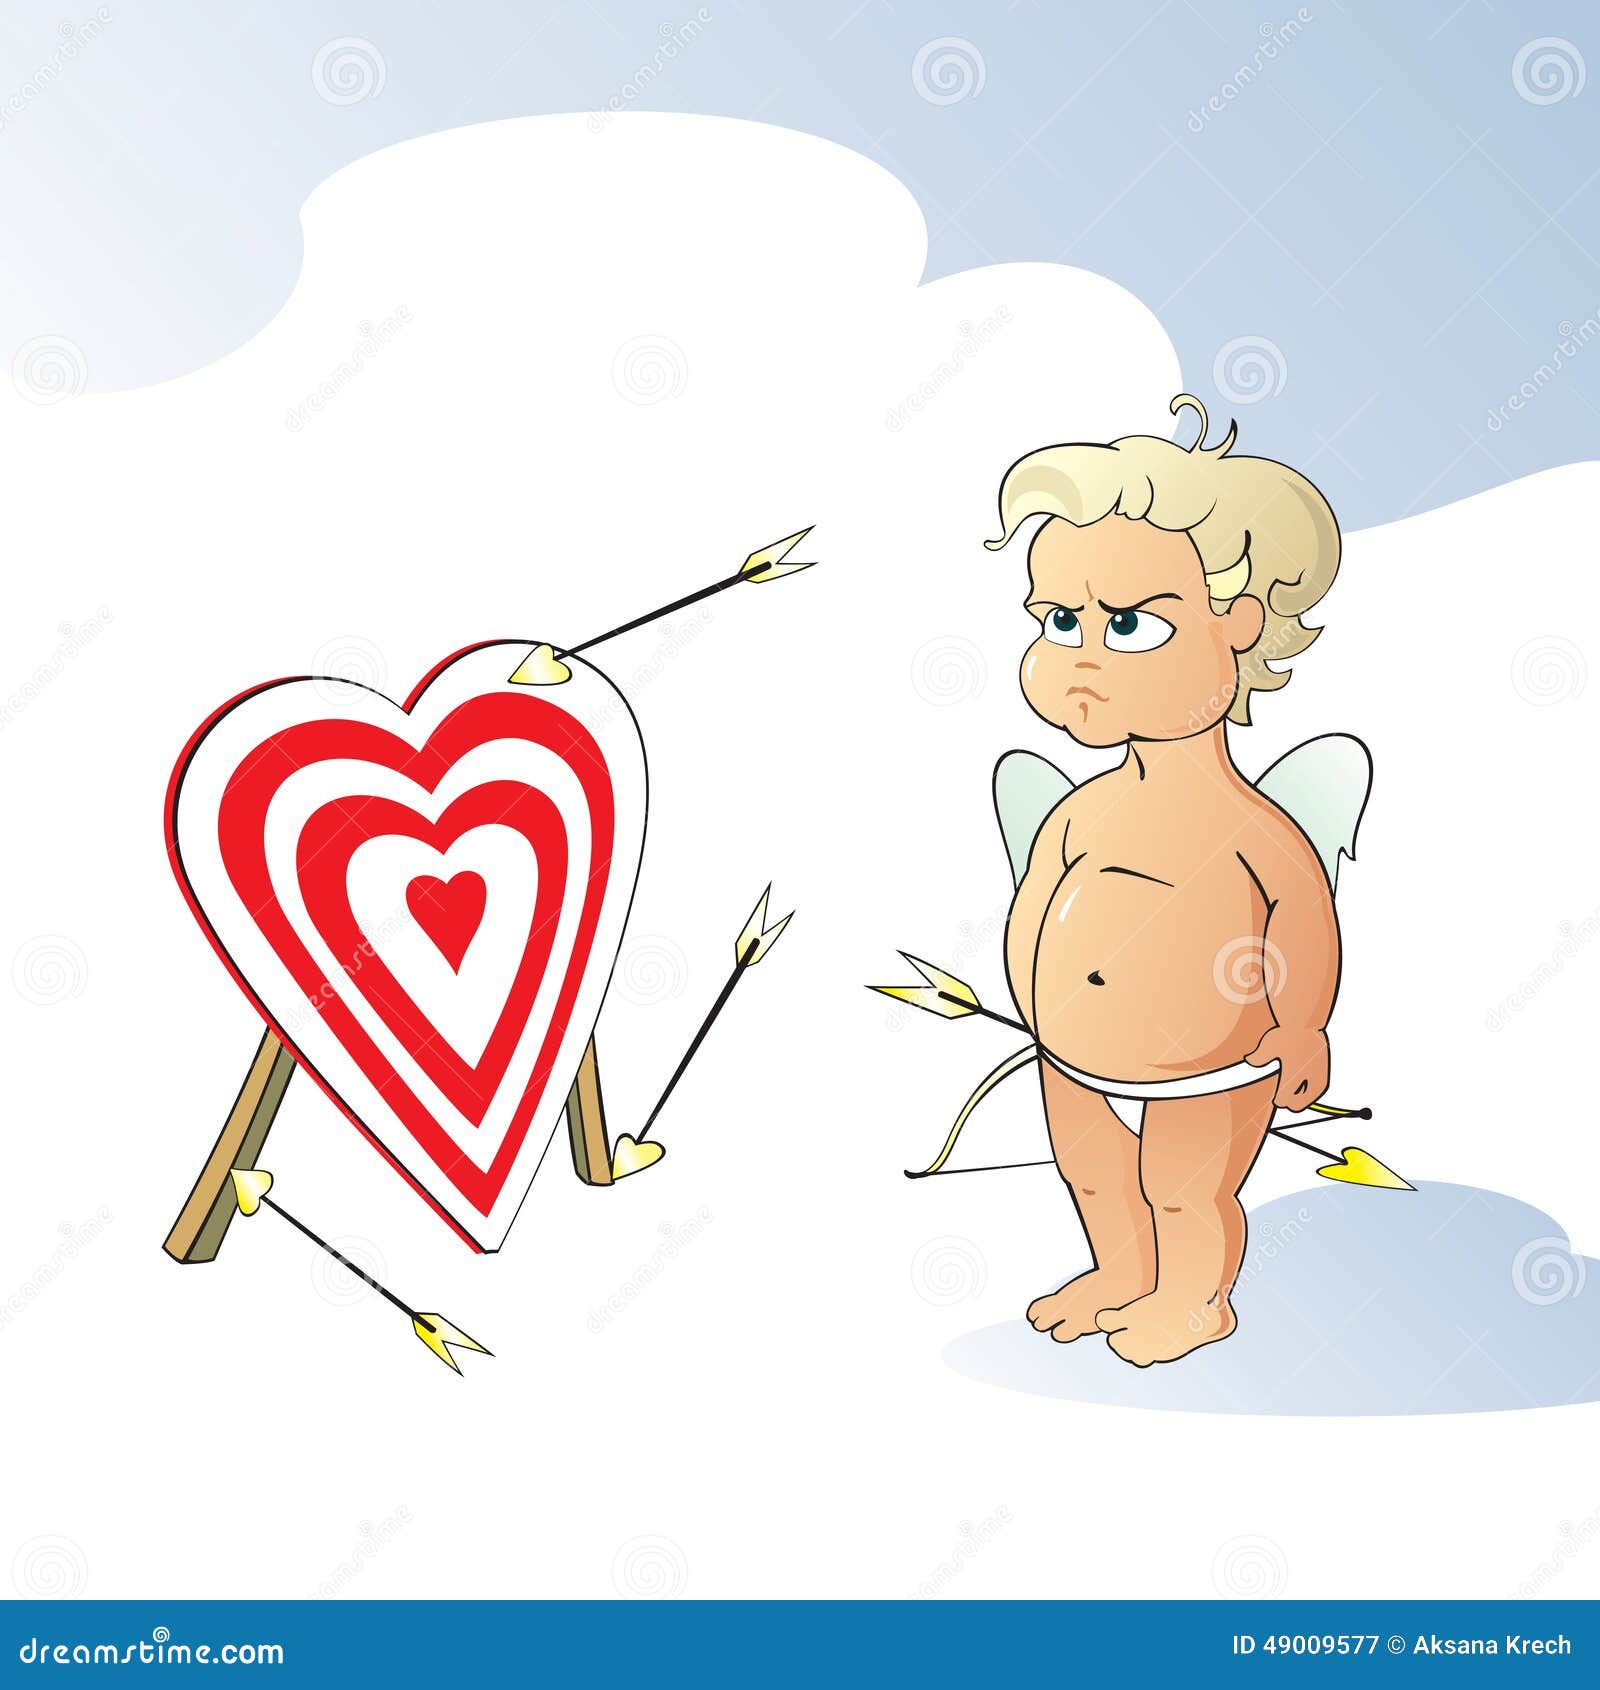 55+ Valentine's Day Messages For Your Wife That Cupid